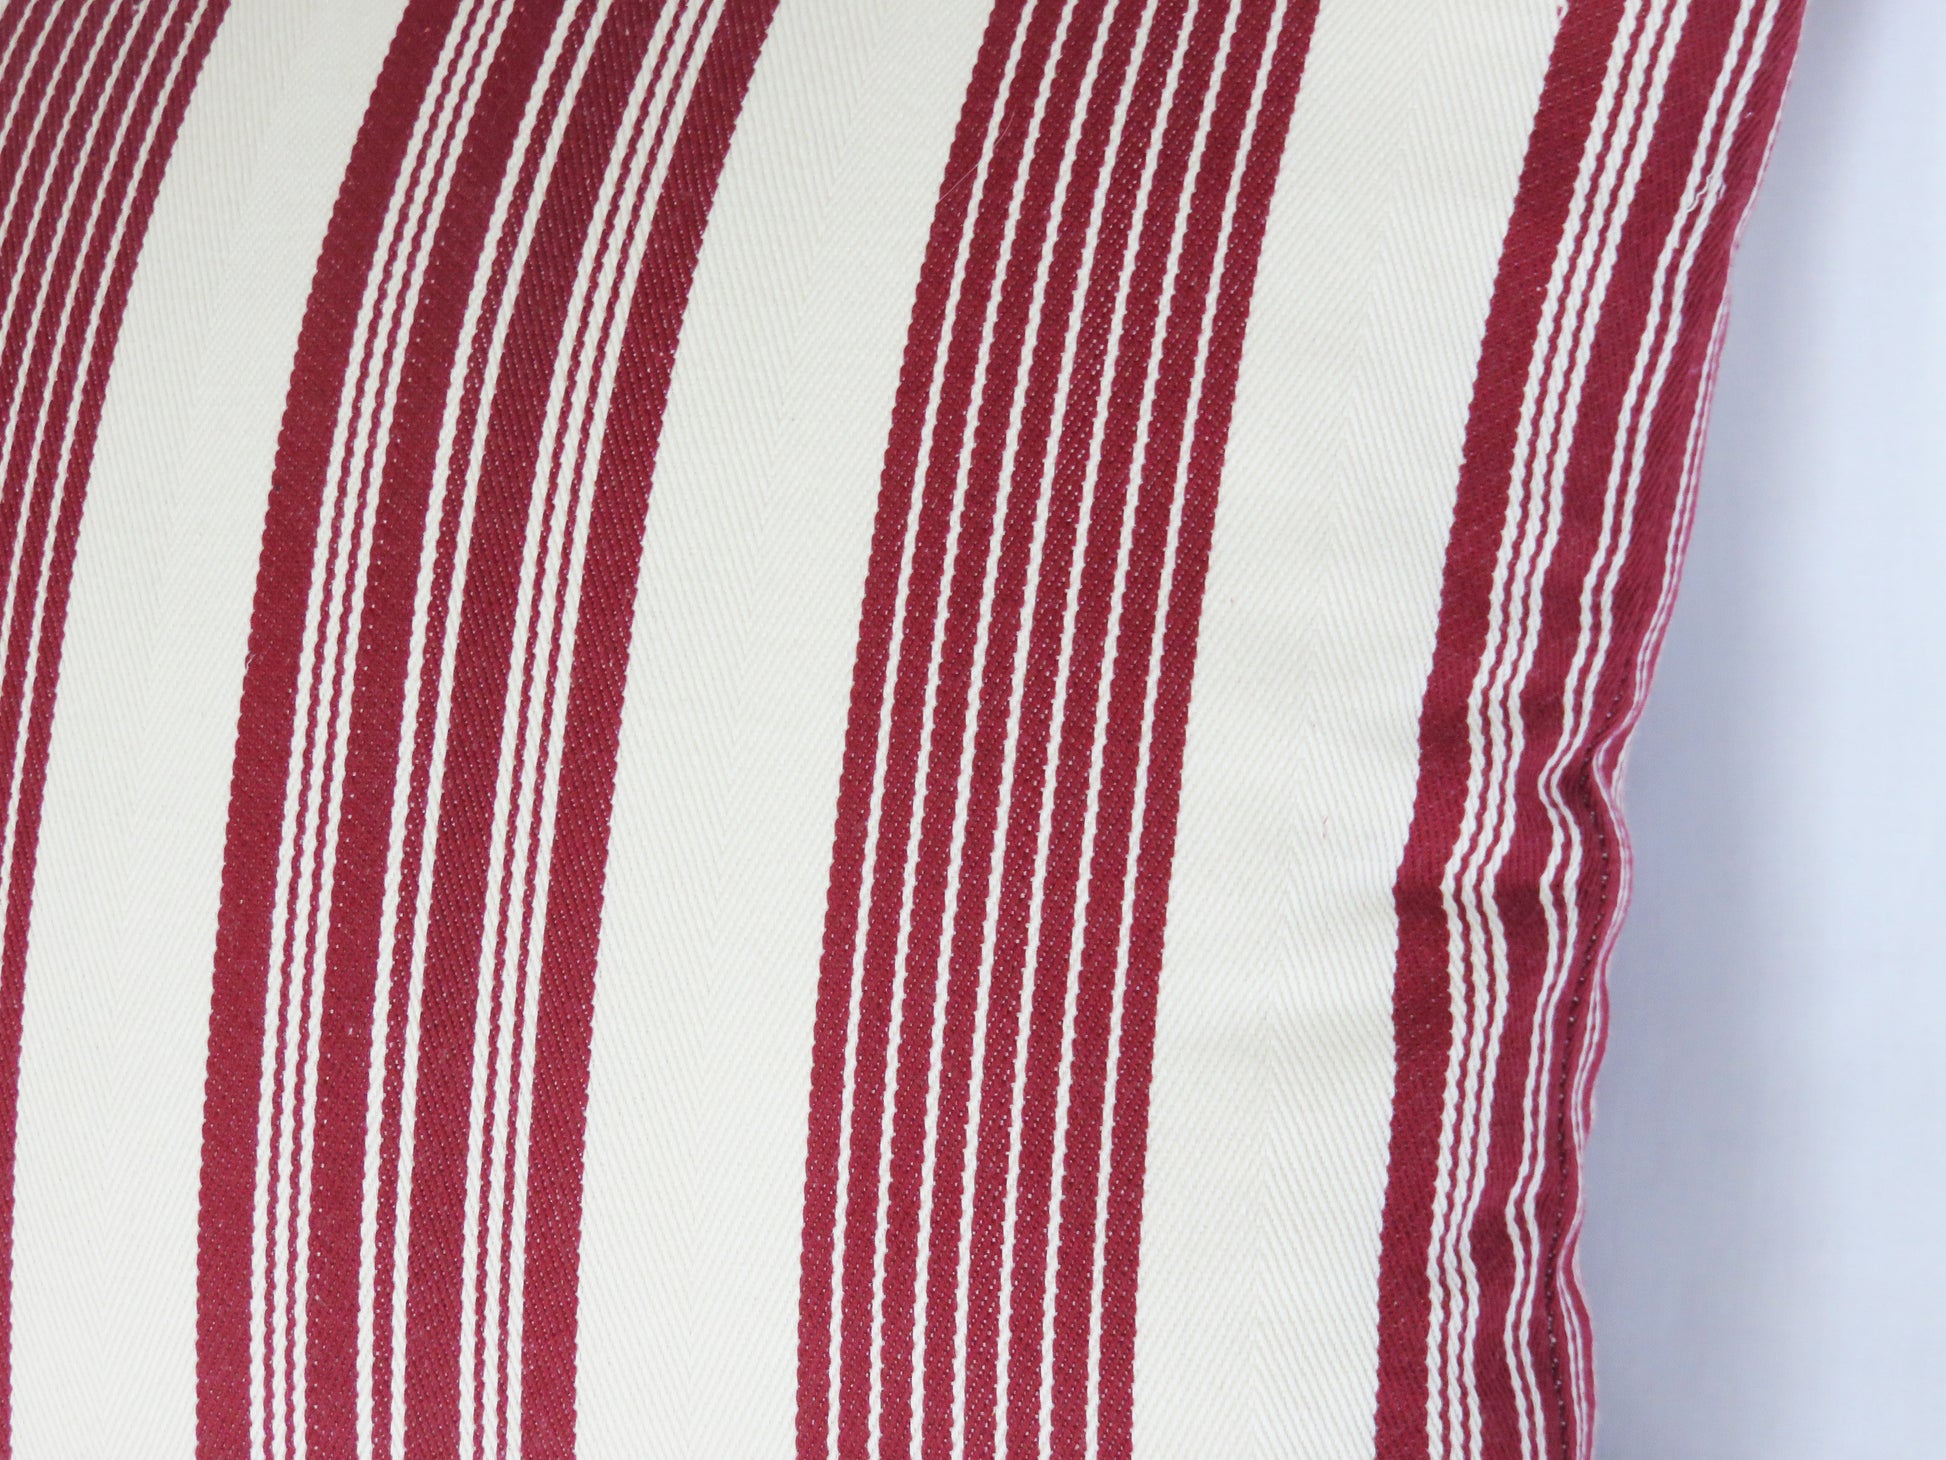 cranberry red and white striped pillow cover